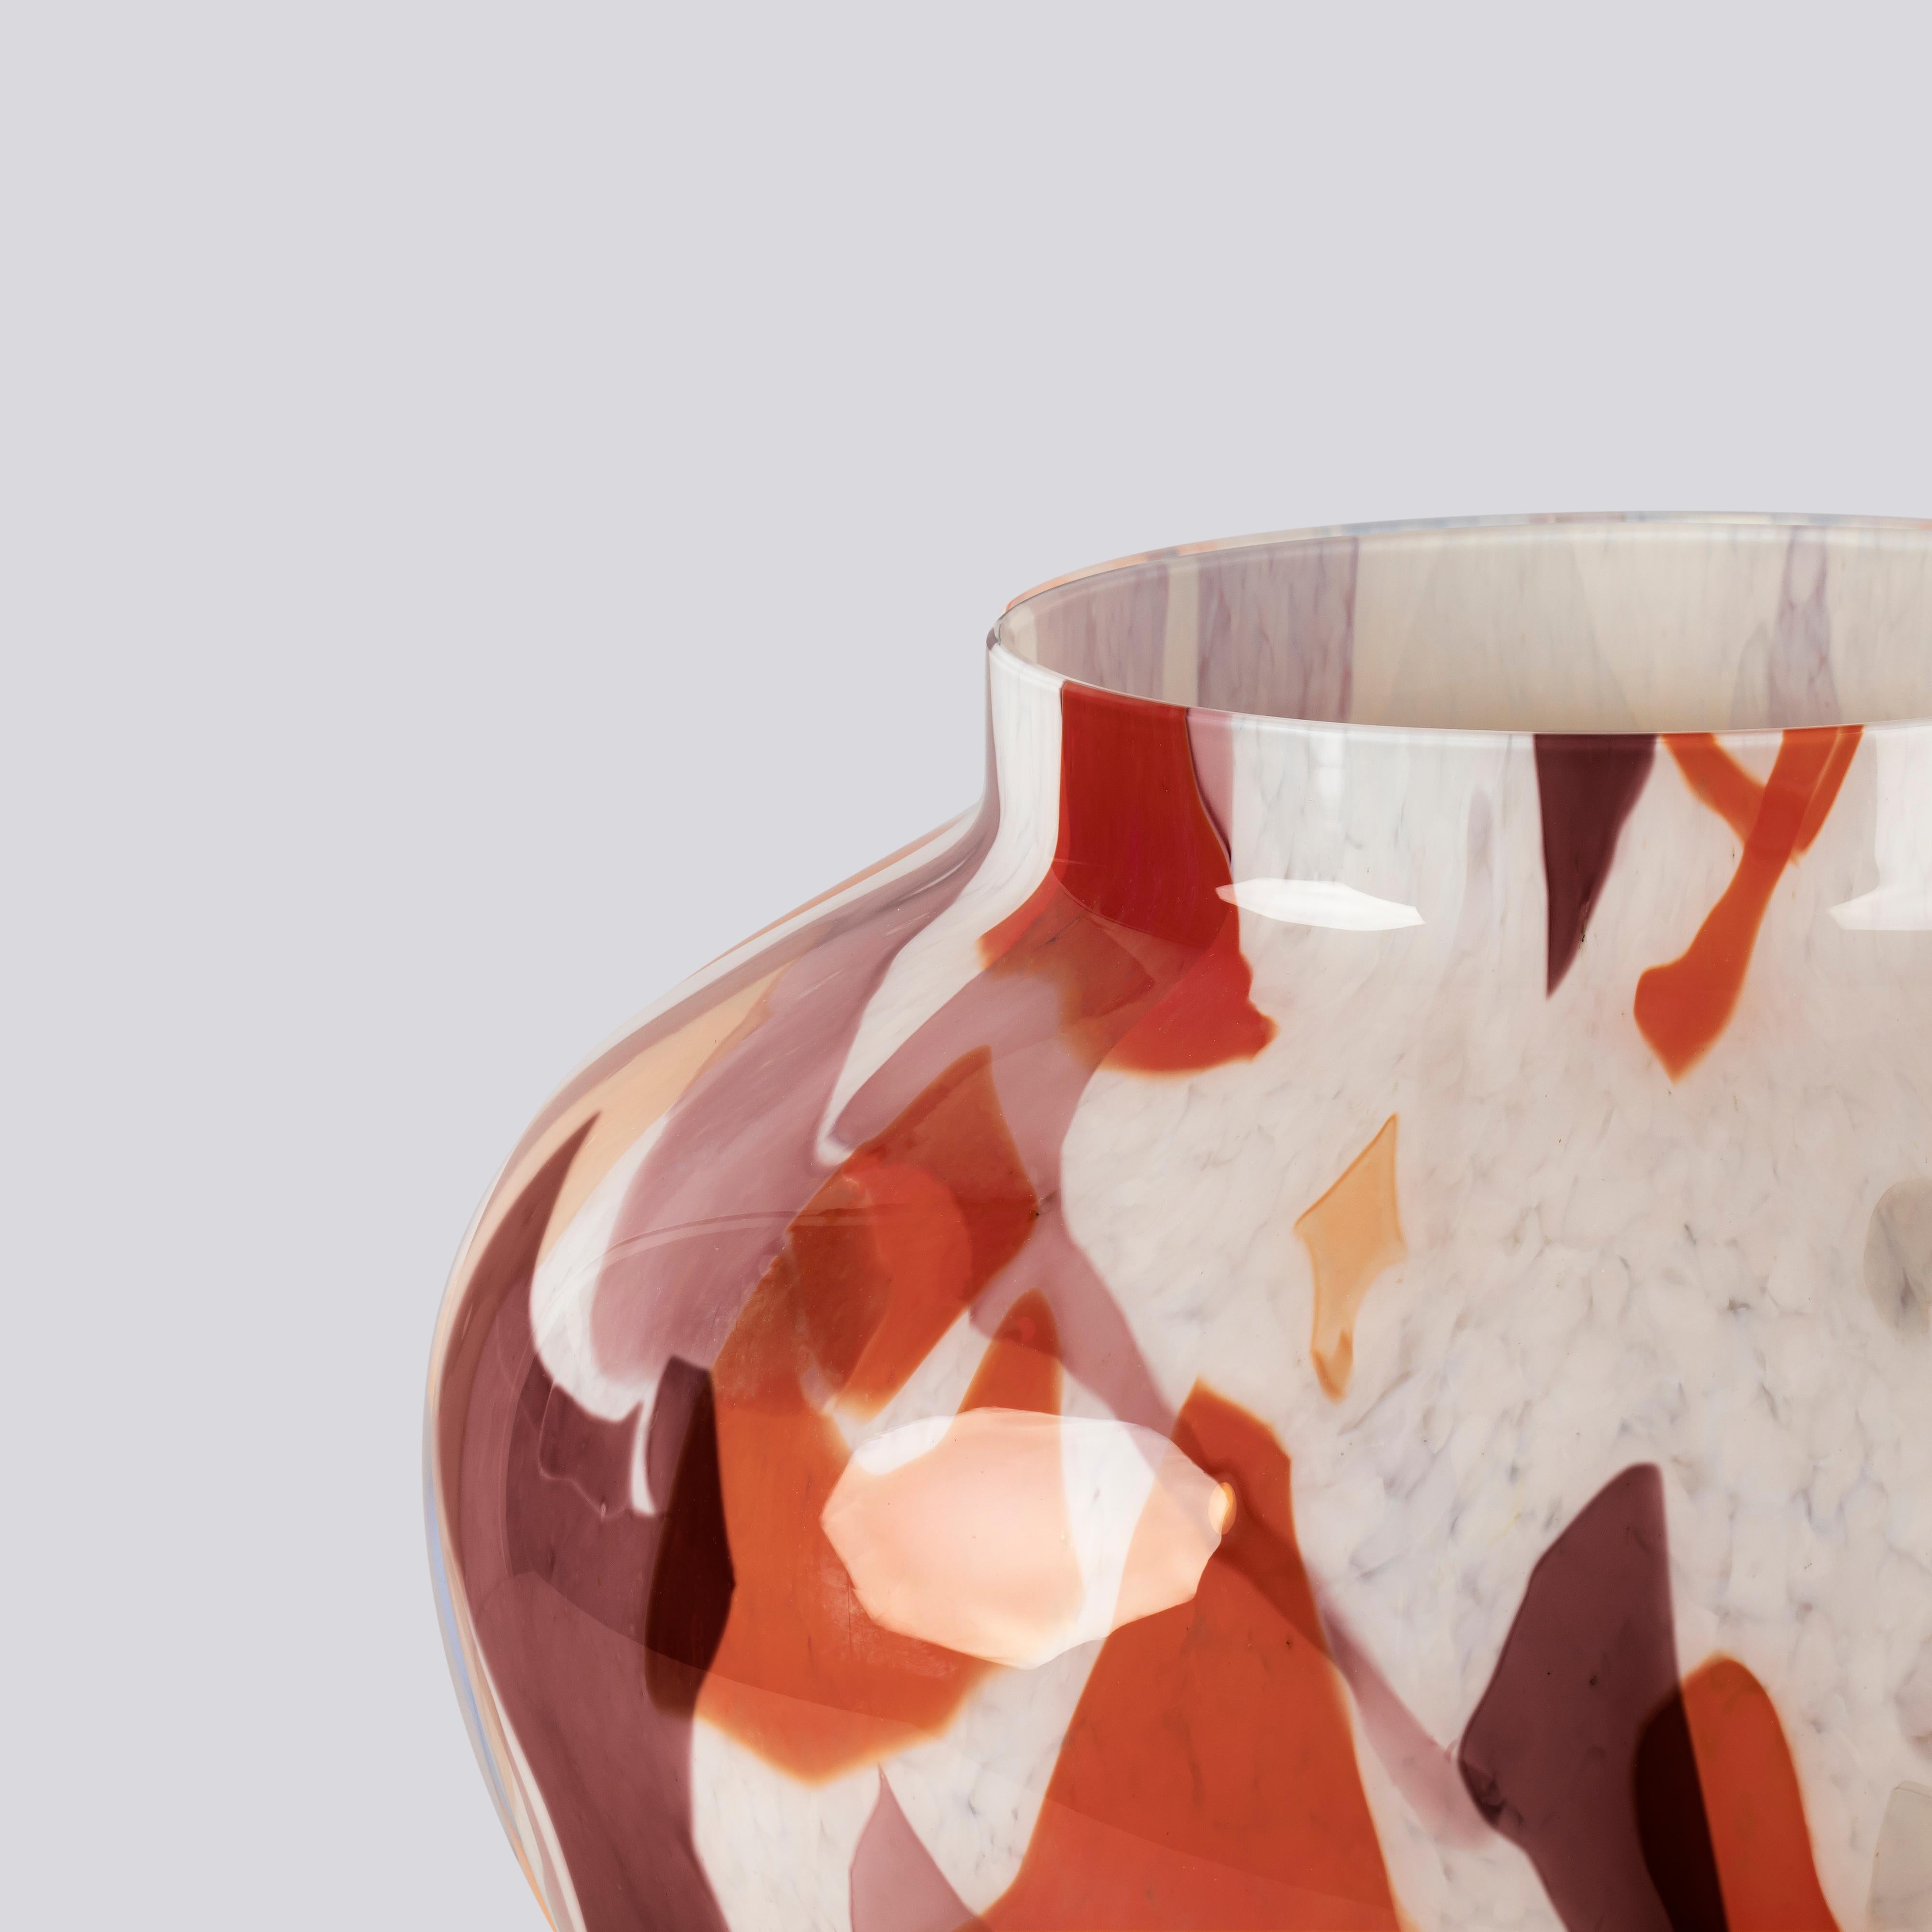 Handcrafted by skilled artisans from Murano, Italy, this vase captures the vibrant colors of autumn. Gray, red, and amethyst glass shards are meticulously arranged on an ivory base, showcasing exceptional craftsmanship and creativity. The swirls of